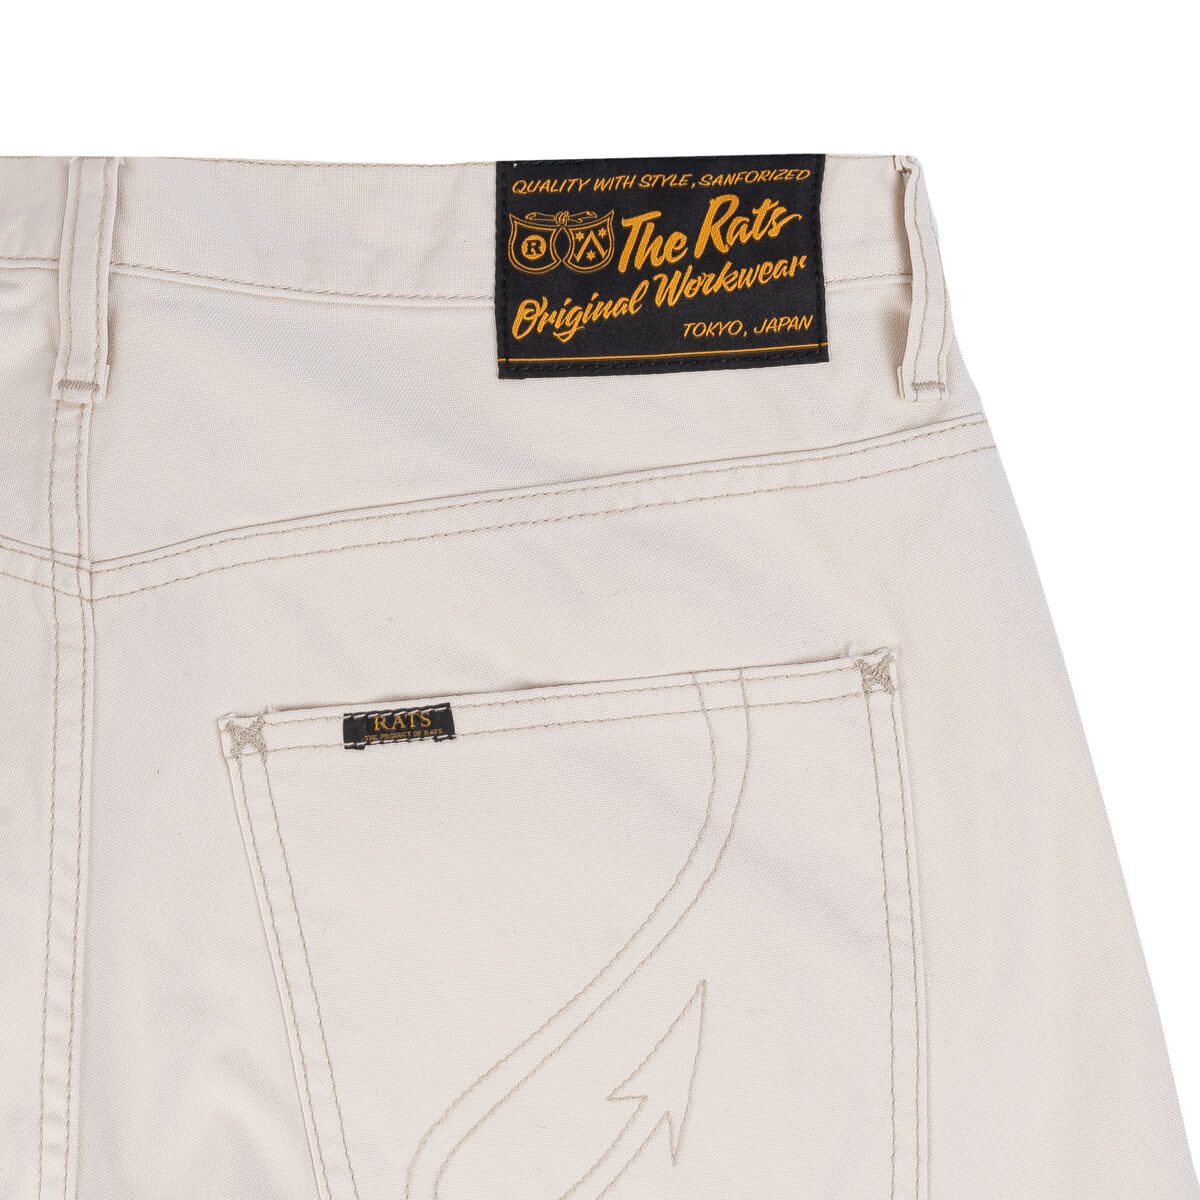 RATS Duck 5Pocket Pants in Ivory | Sonder Supplies